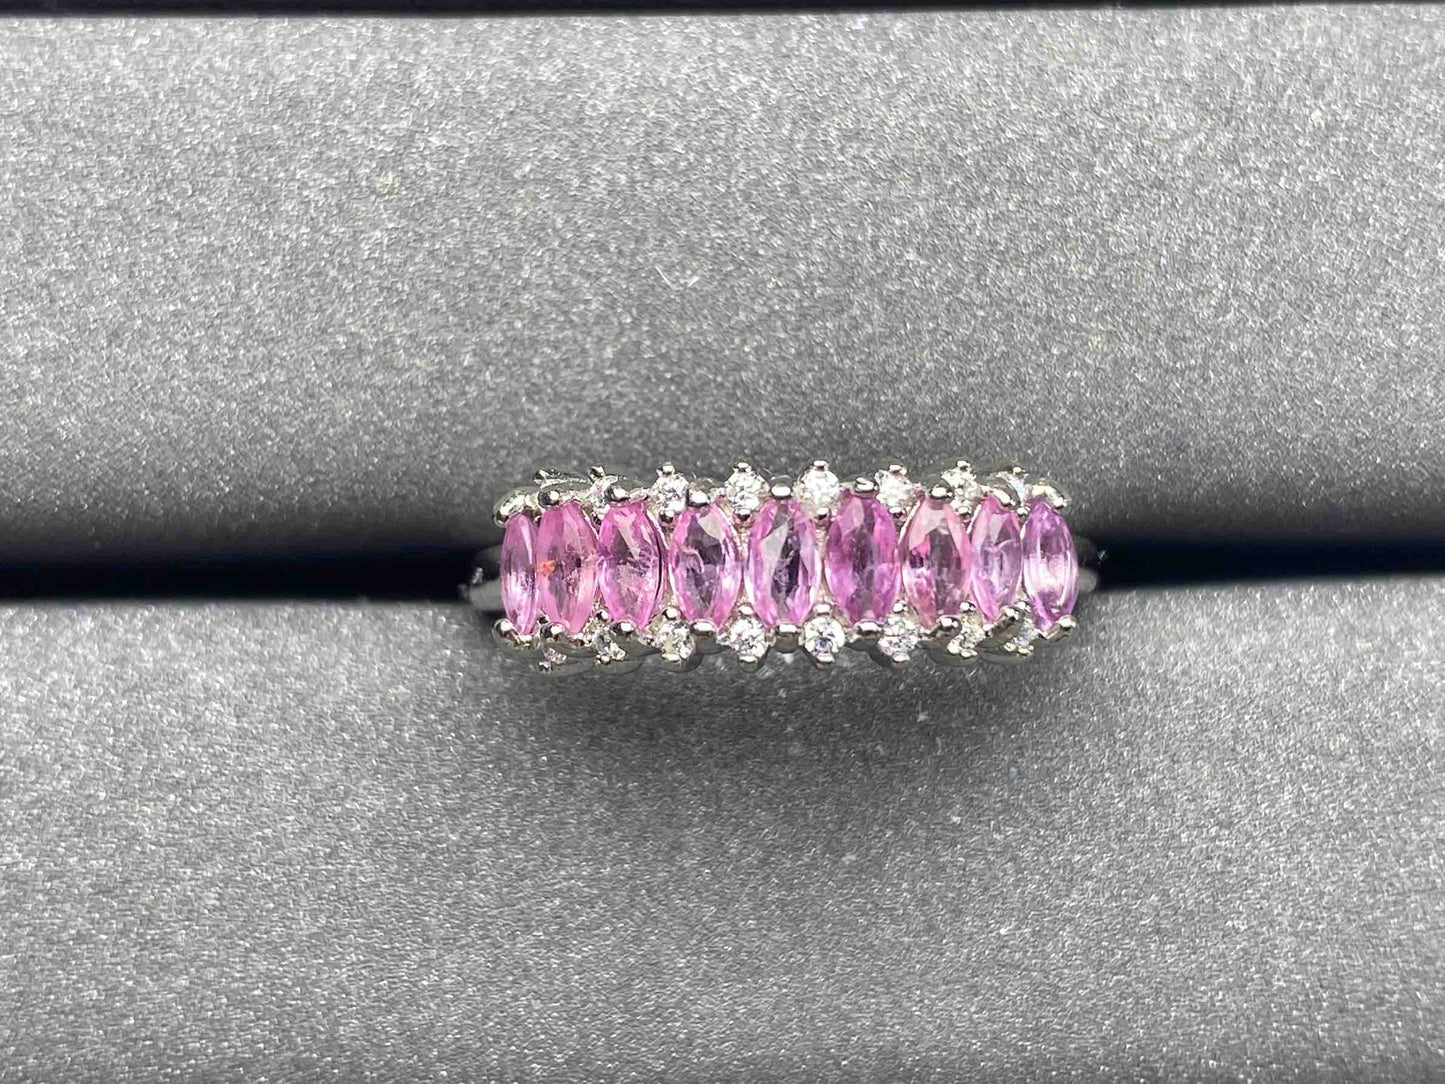 A505 Pink Sapphire Ring